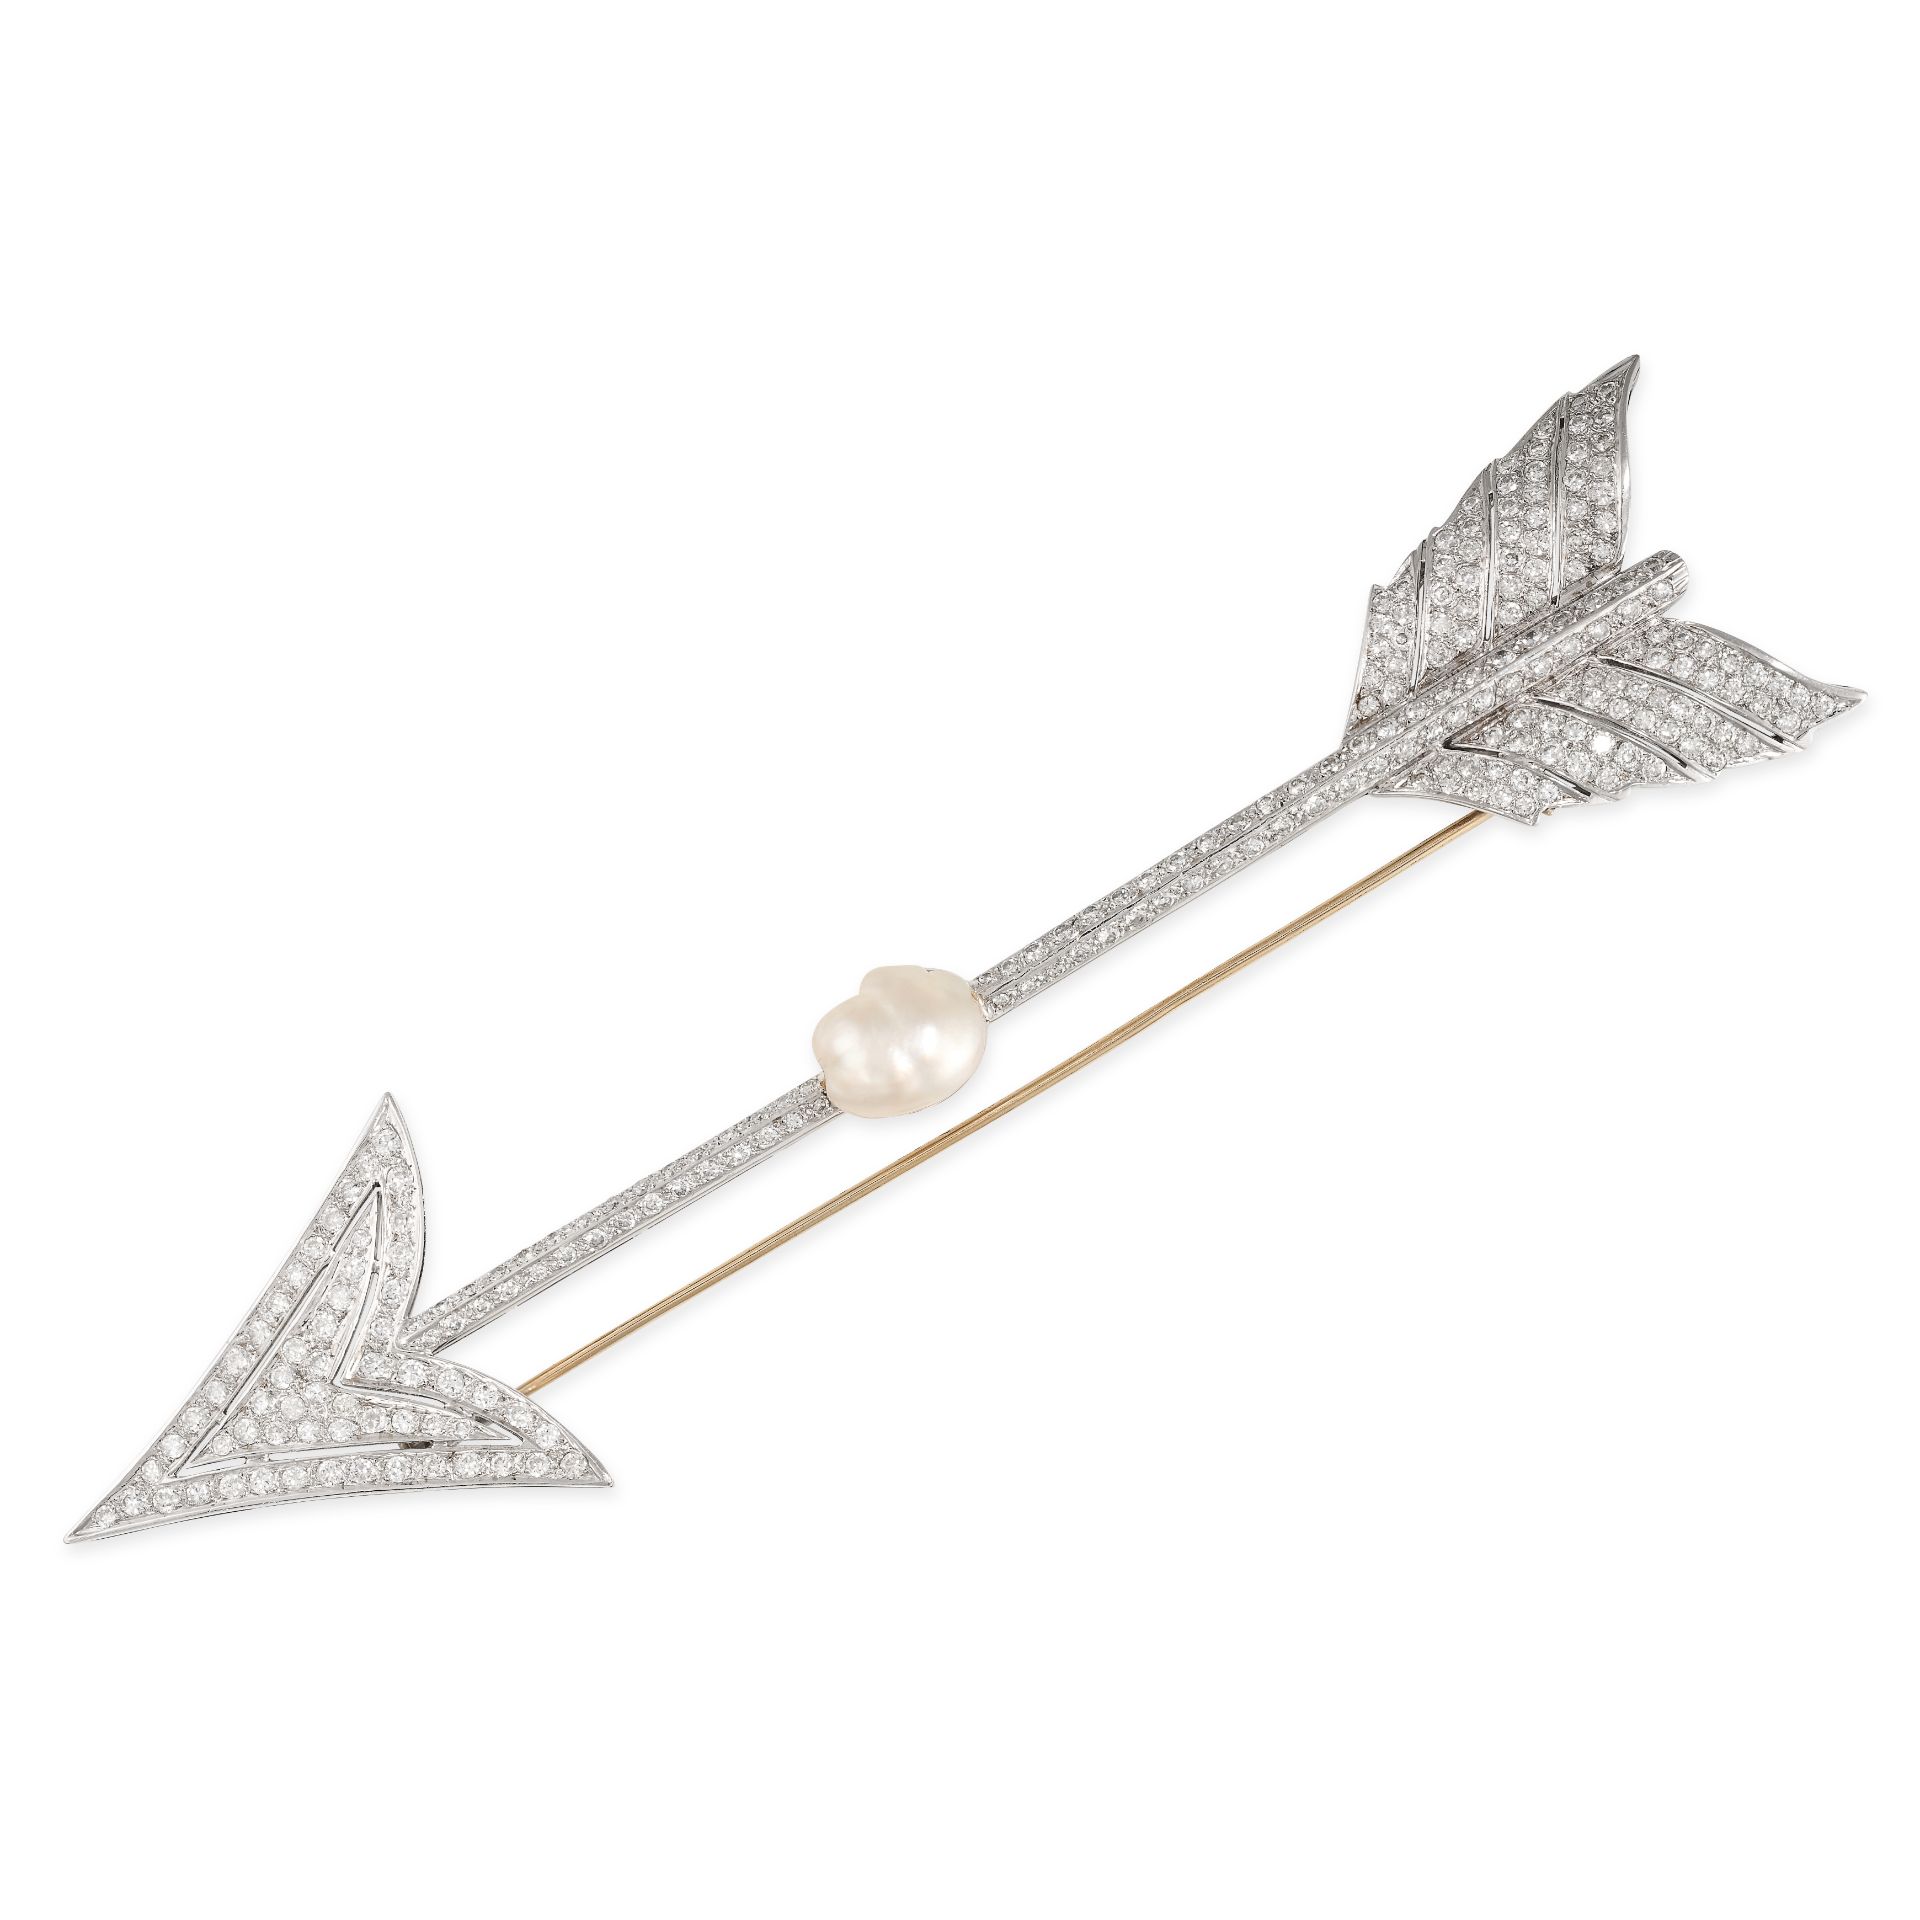 A NATURAL PEARL AND DIAMOND ARROW BROOCH the arrow pave set with round brilliant cut diamonds and